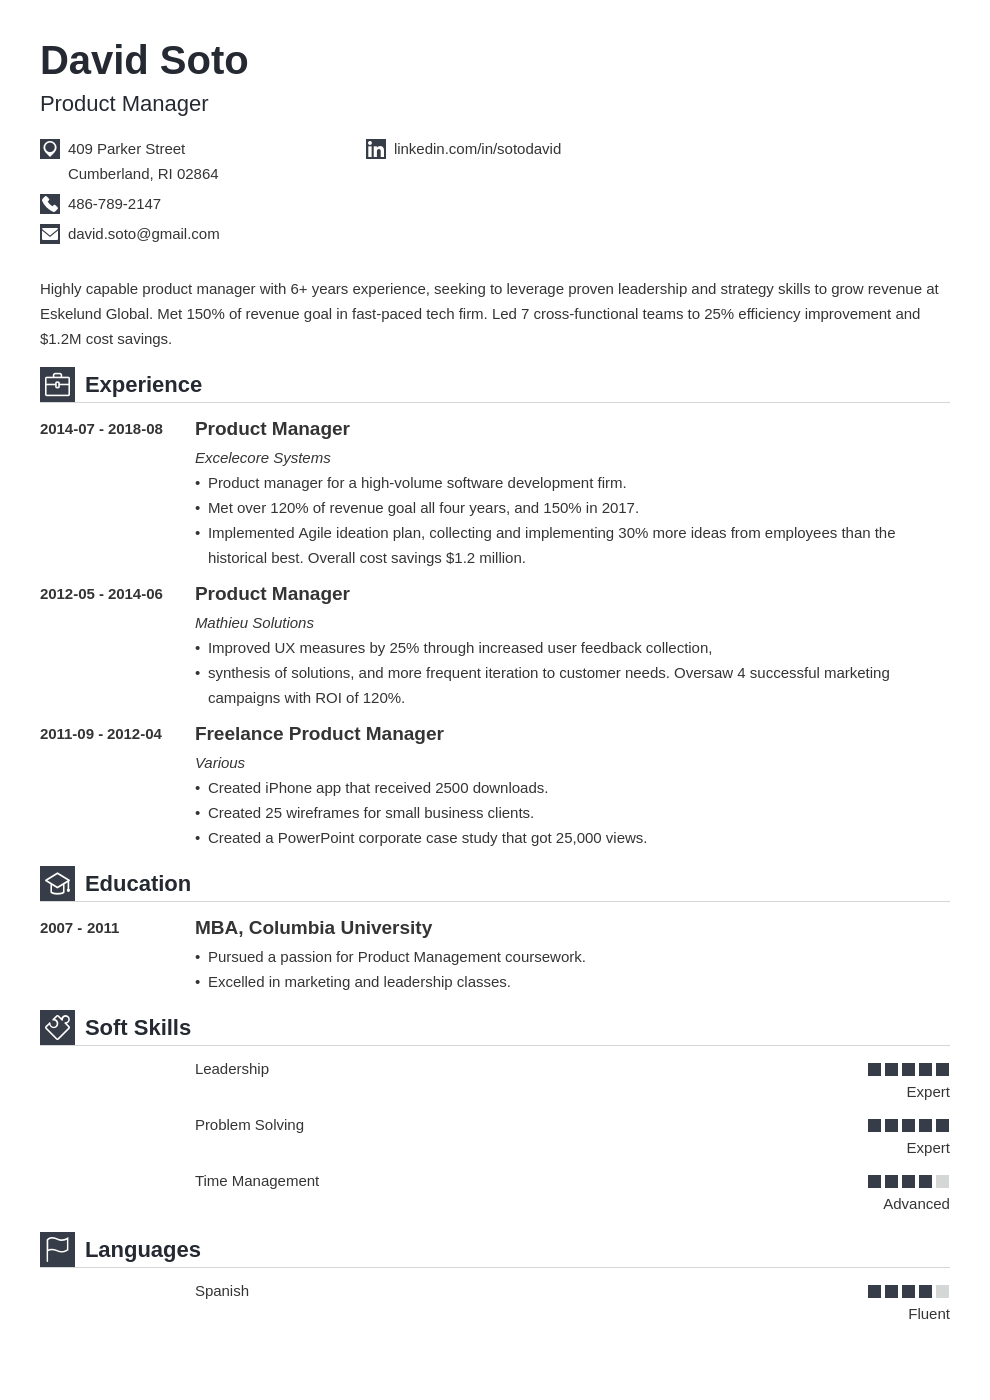 Product Manager Resume Template from cdn-images.zety.com